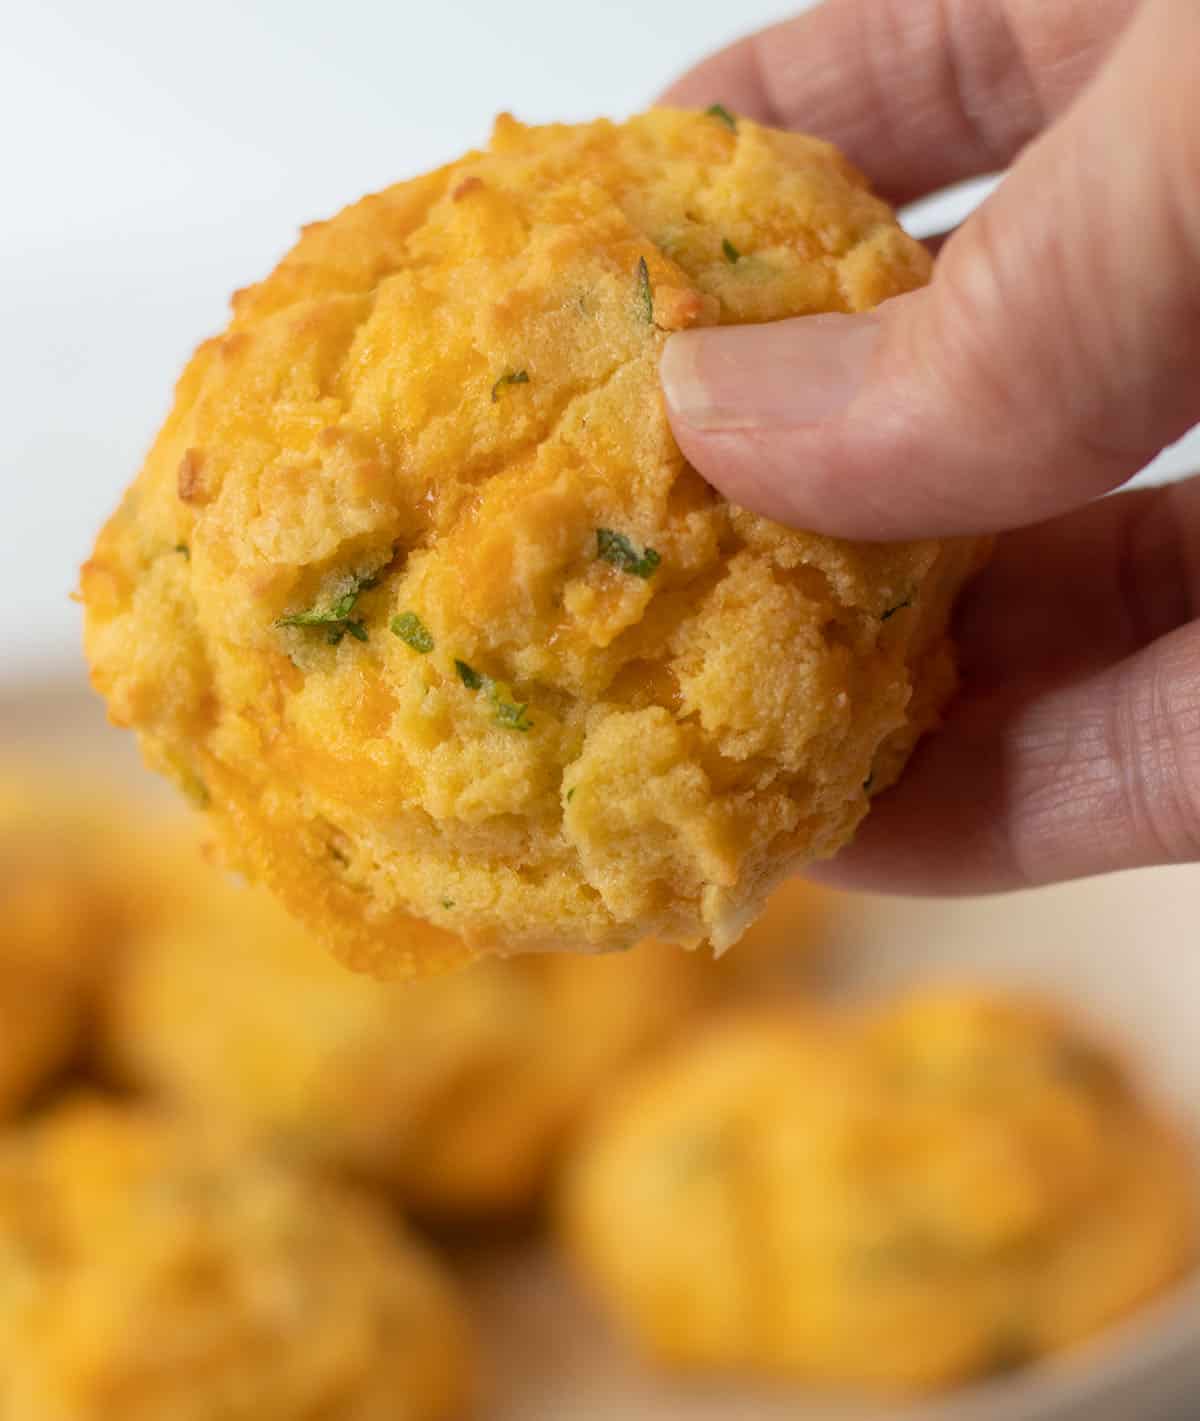 holding a cheddar coconut flour biscuit in a hand.